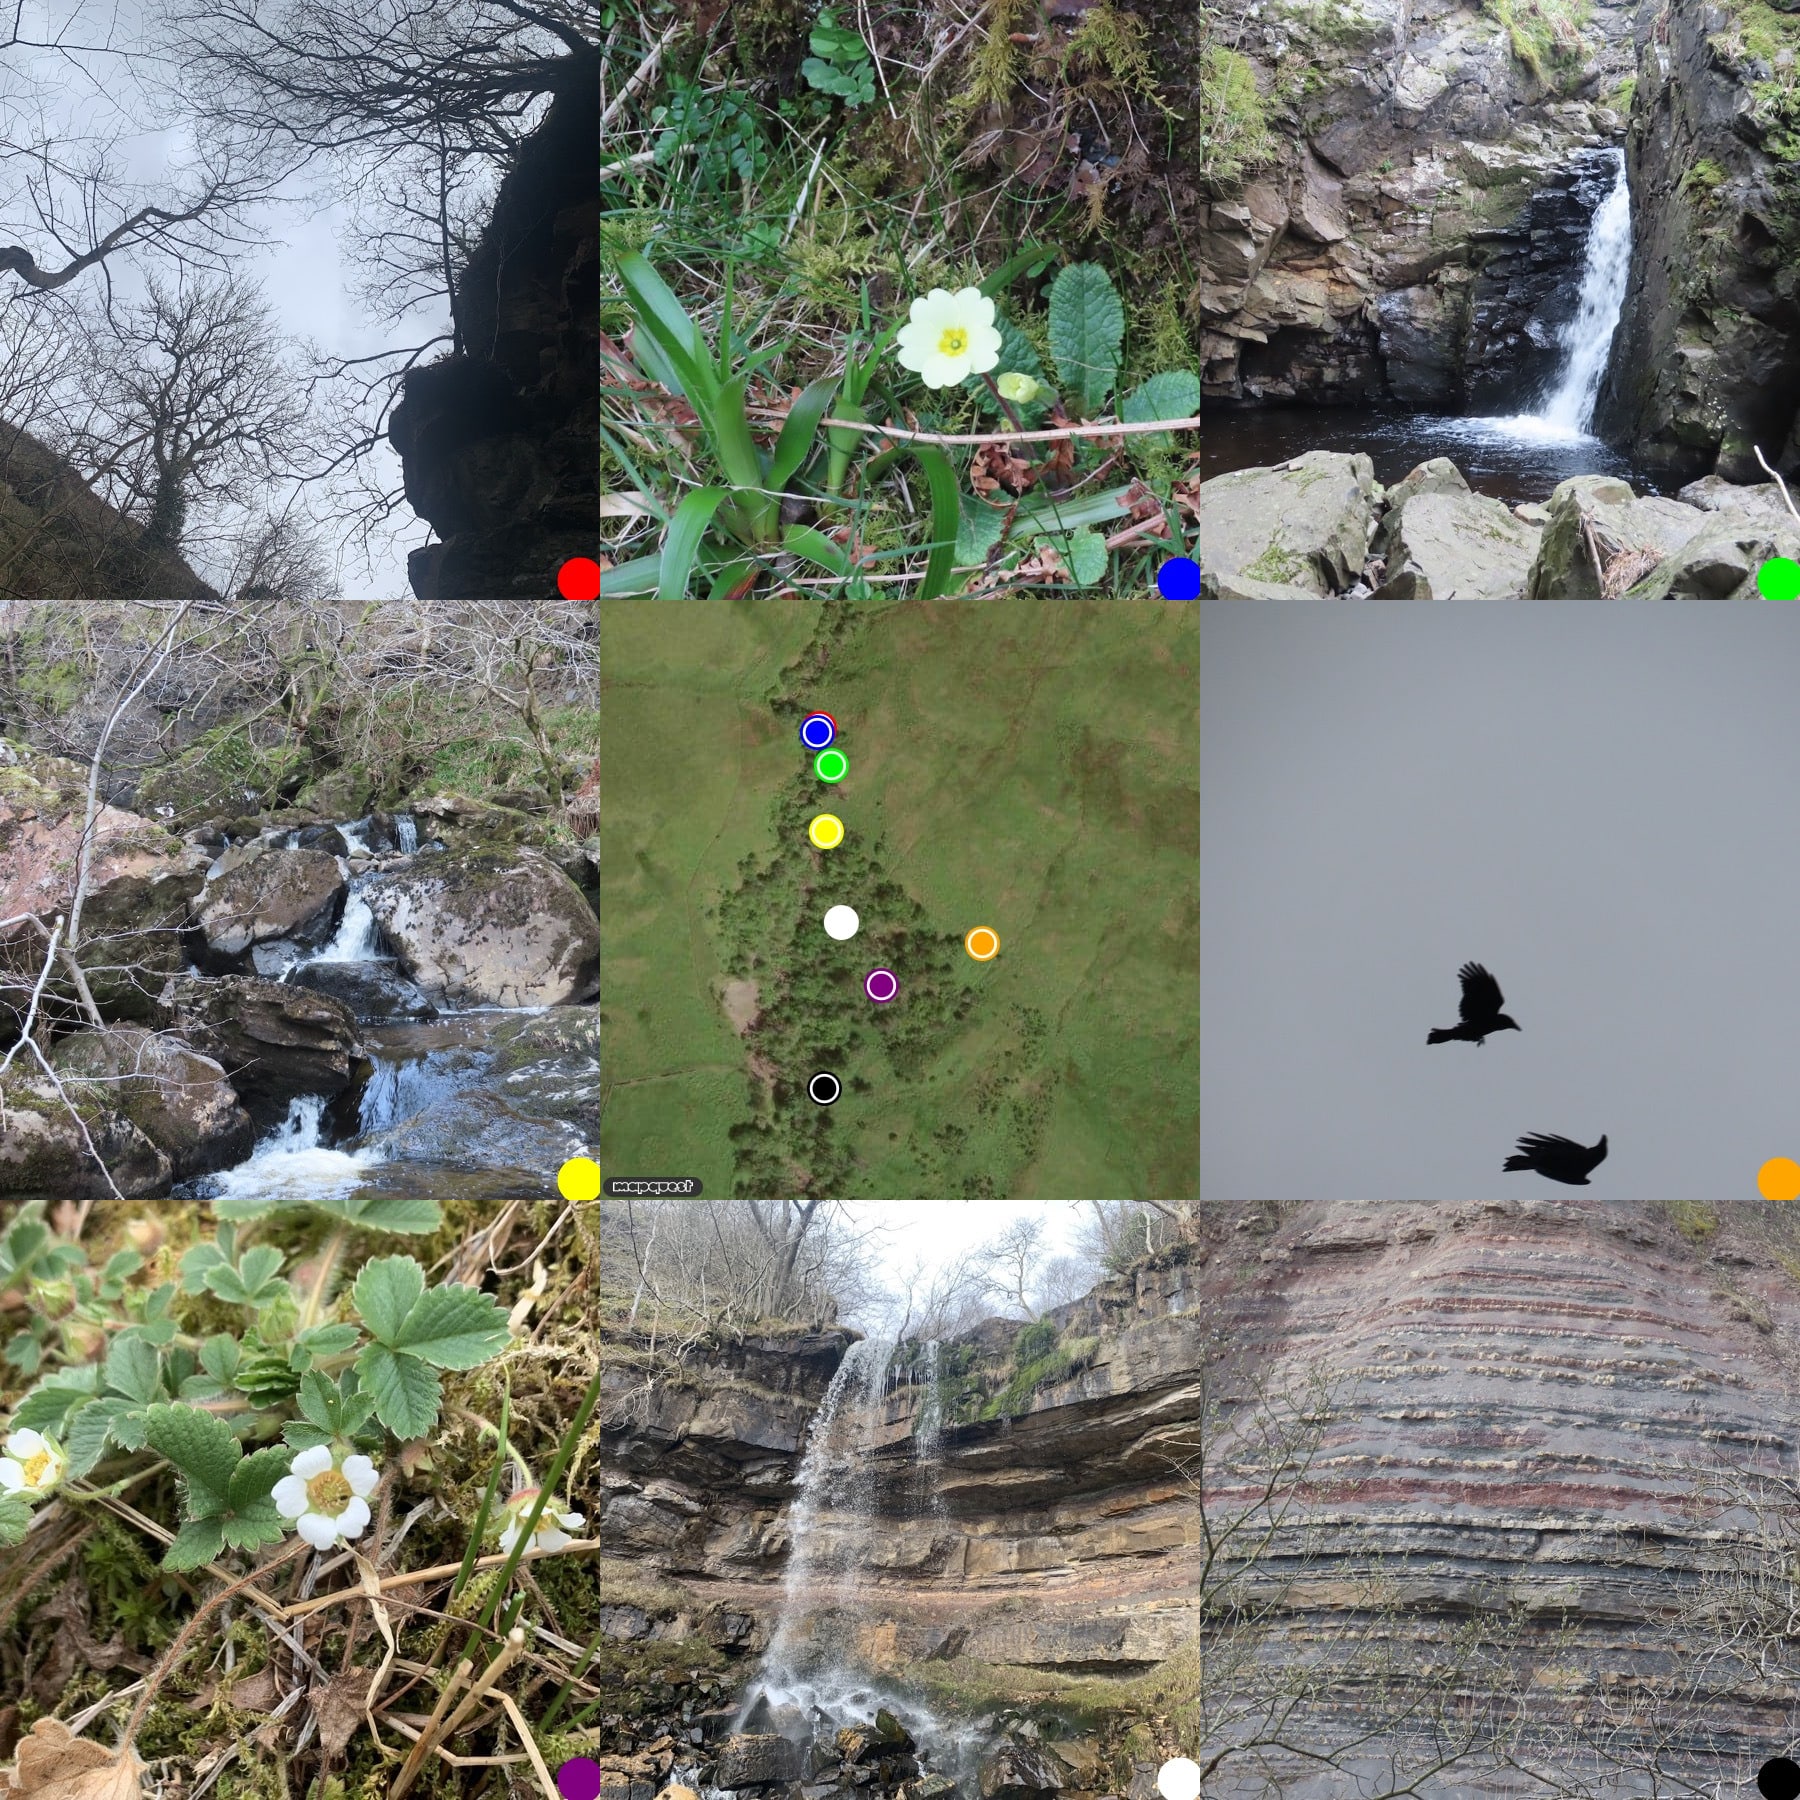 3 by 3 grid of pictures. Top left, looking up through gorge & trees to sky; primrose;waterfall; waterfall;map;2 ravens, 1 upside down; barren strawberry flower; main waterfall; Ballagan Formation.